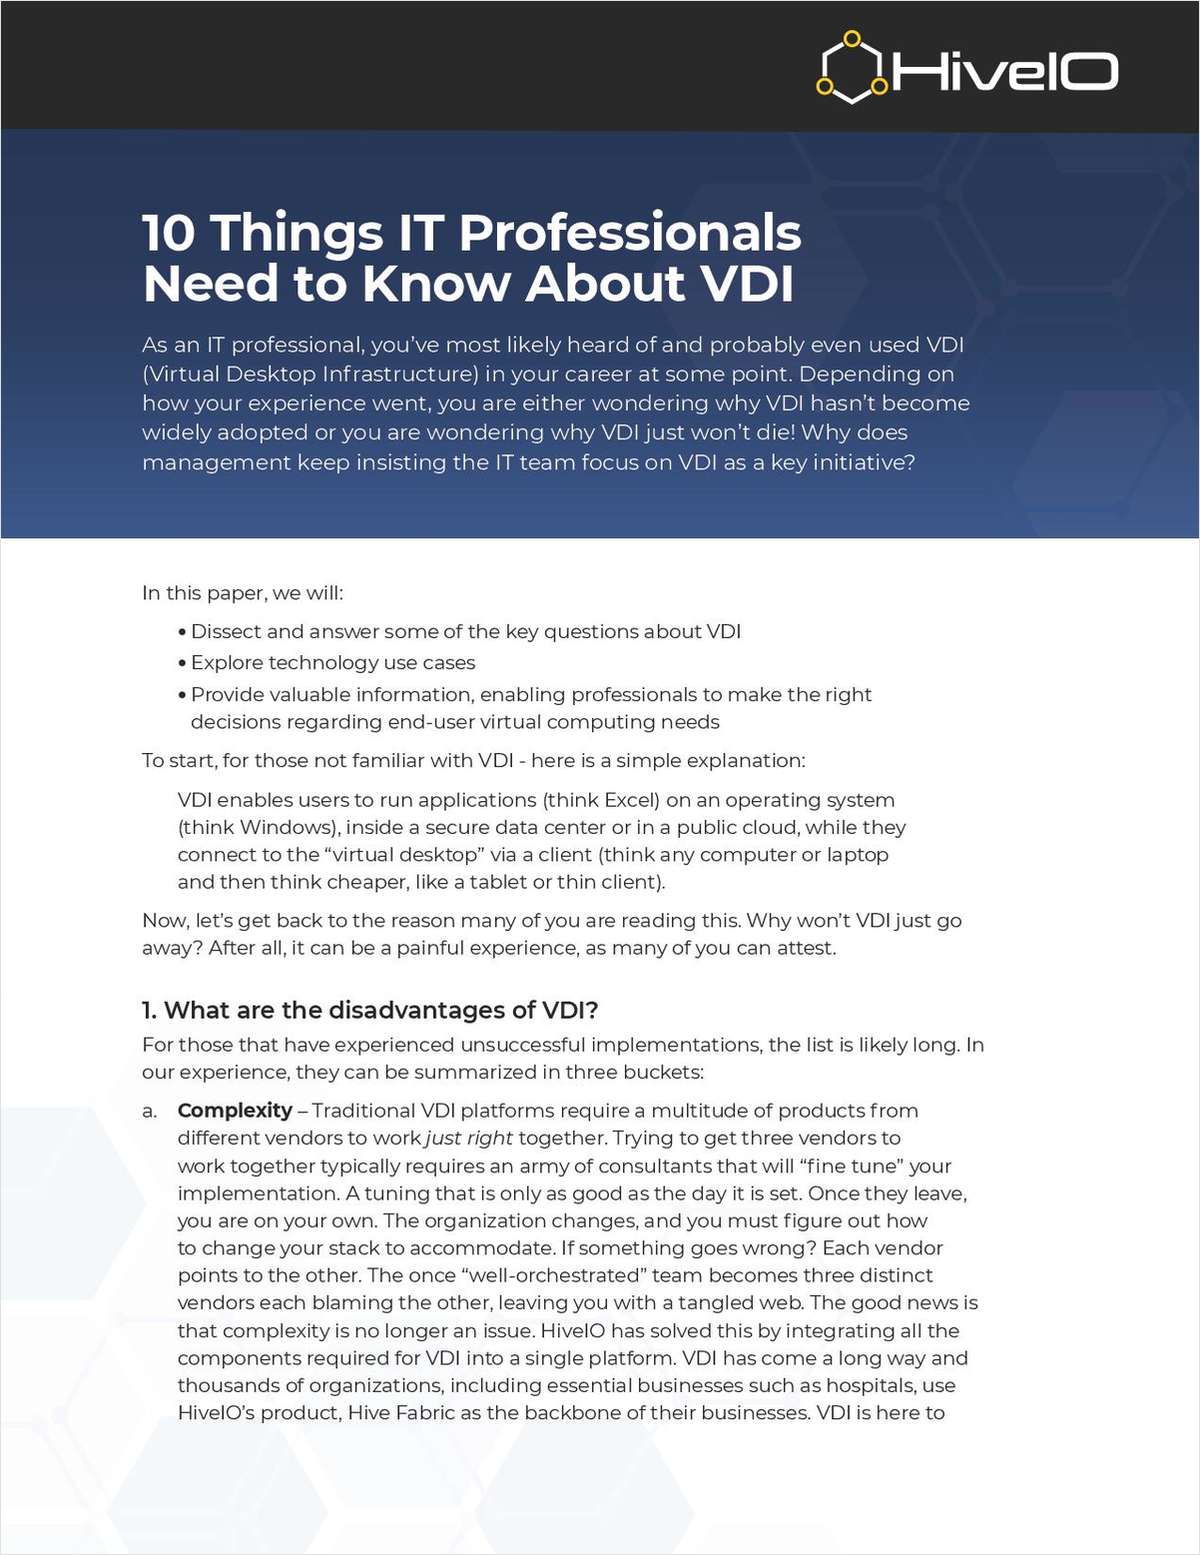 10 Things IT Professionals Need to Know About VDI